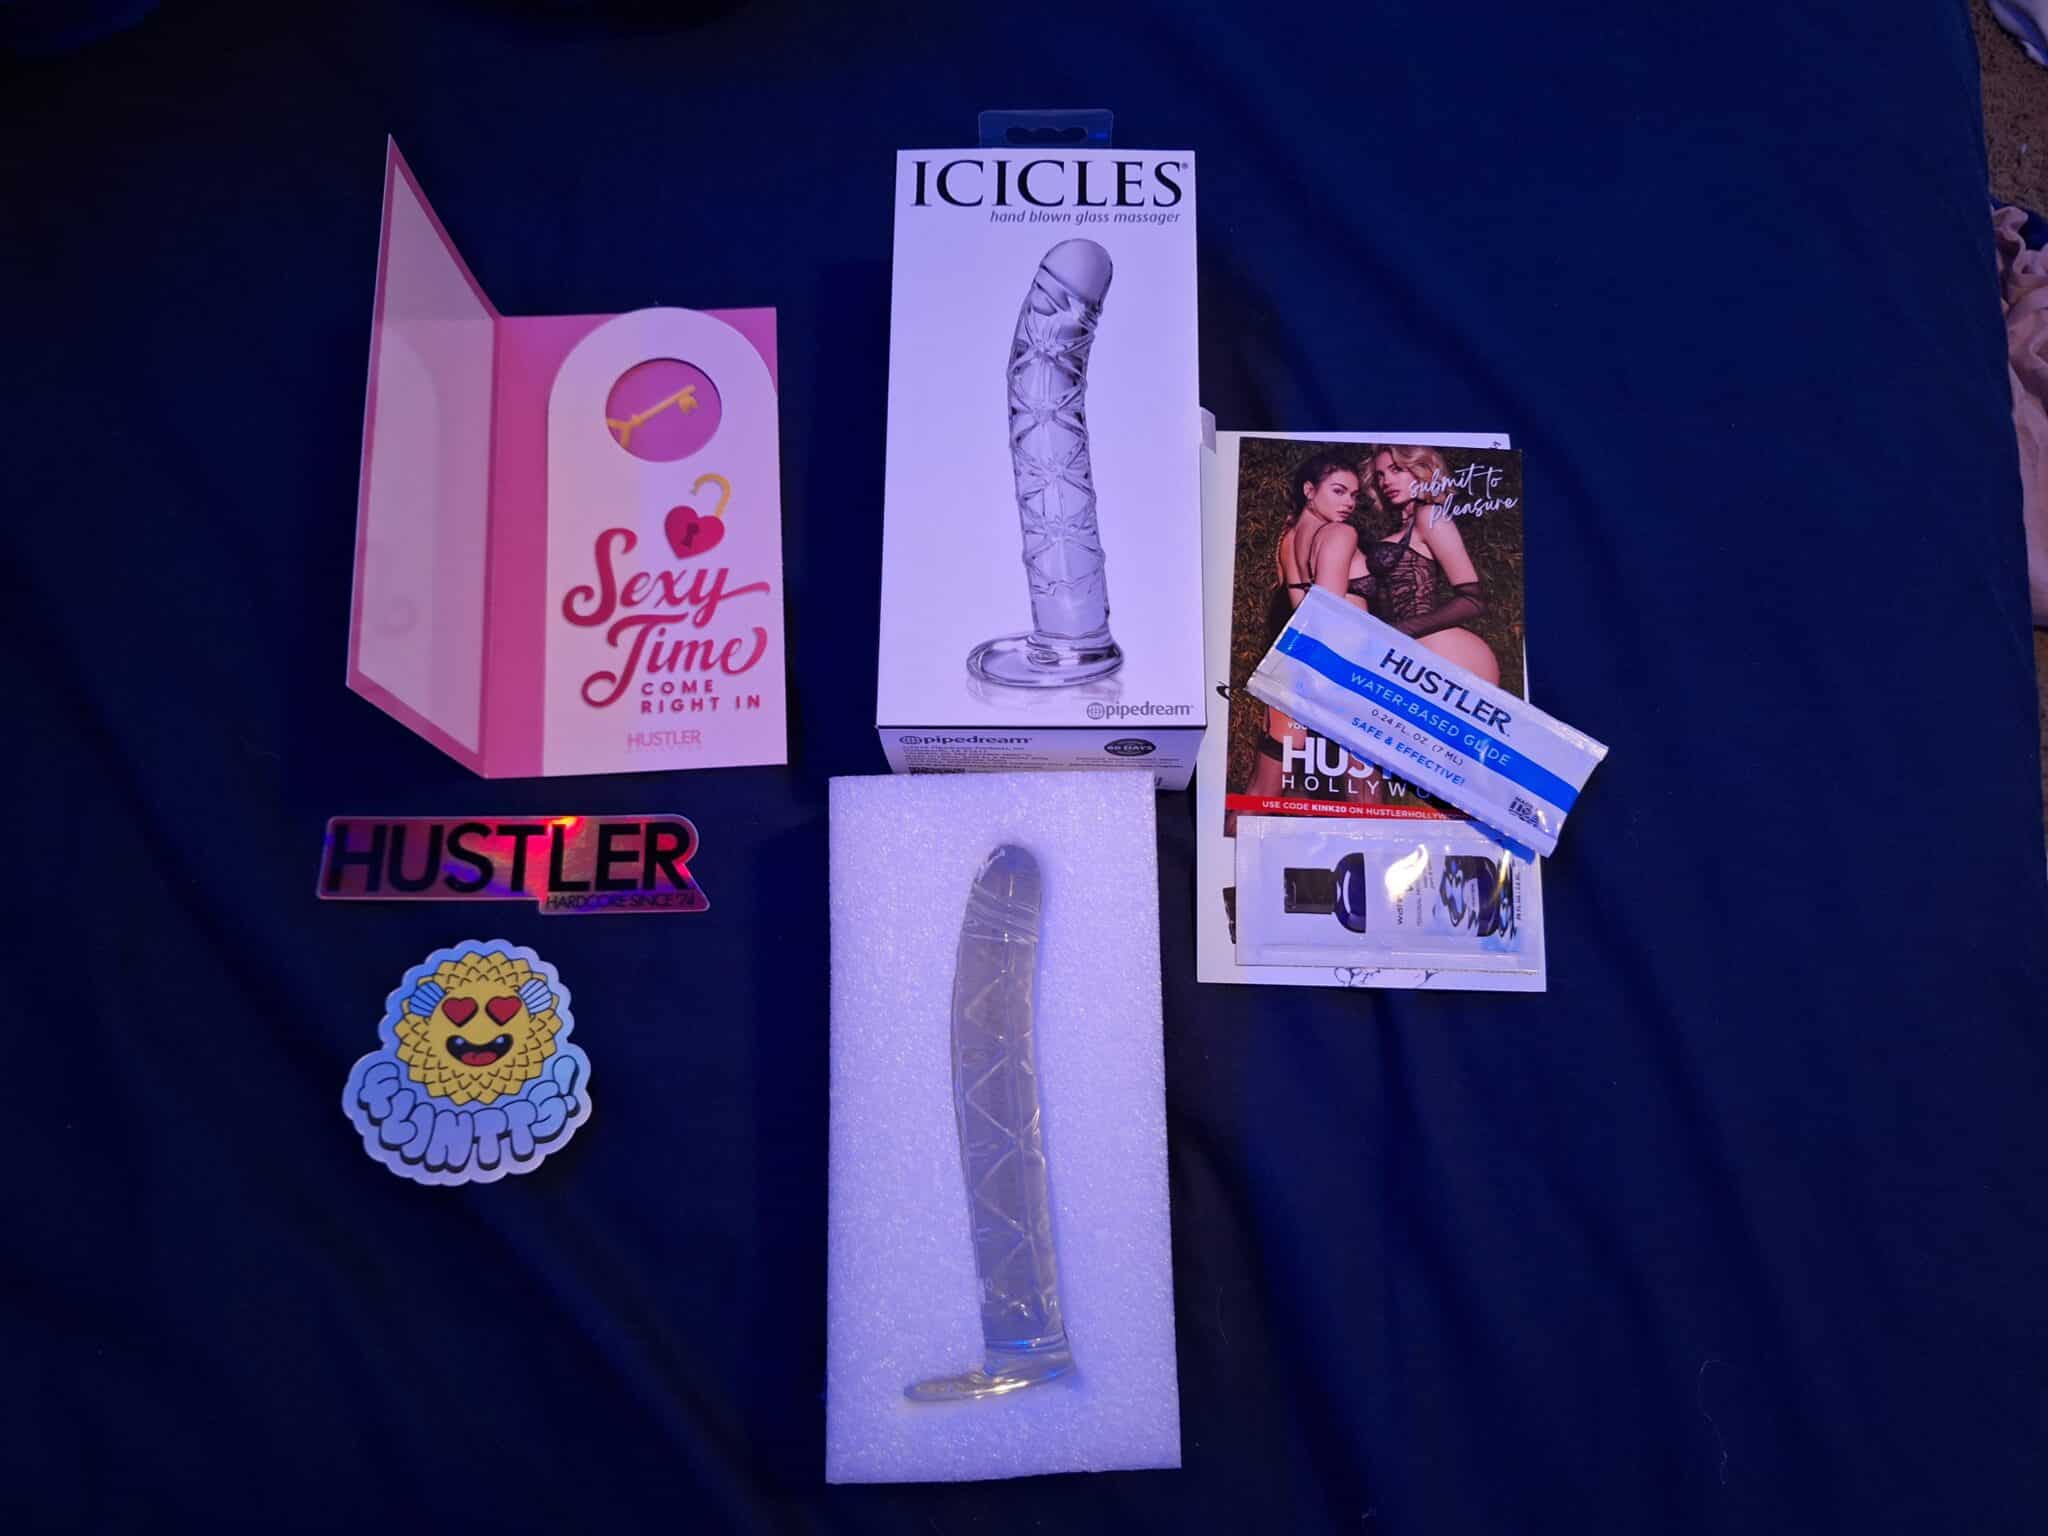 Icicles No. 60 Glass Dildo Unwrapping the Icicles No. 60 Glass Dildo: A Look at the Packaging